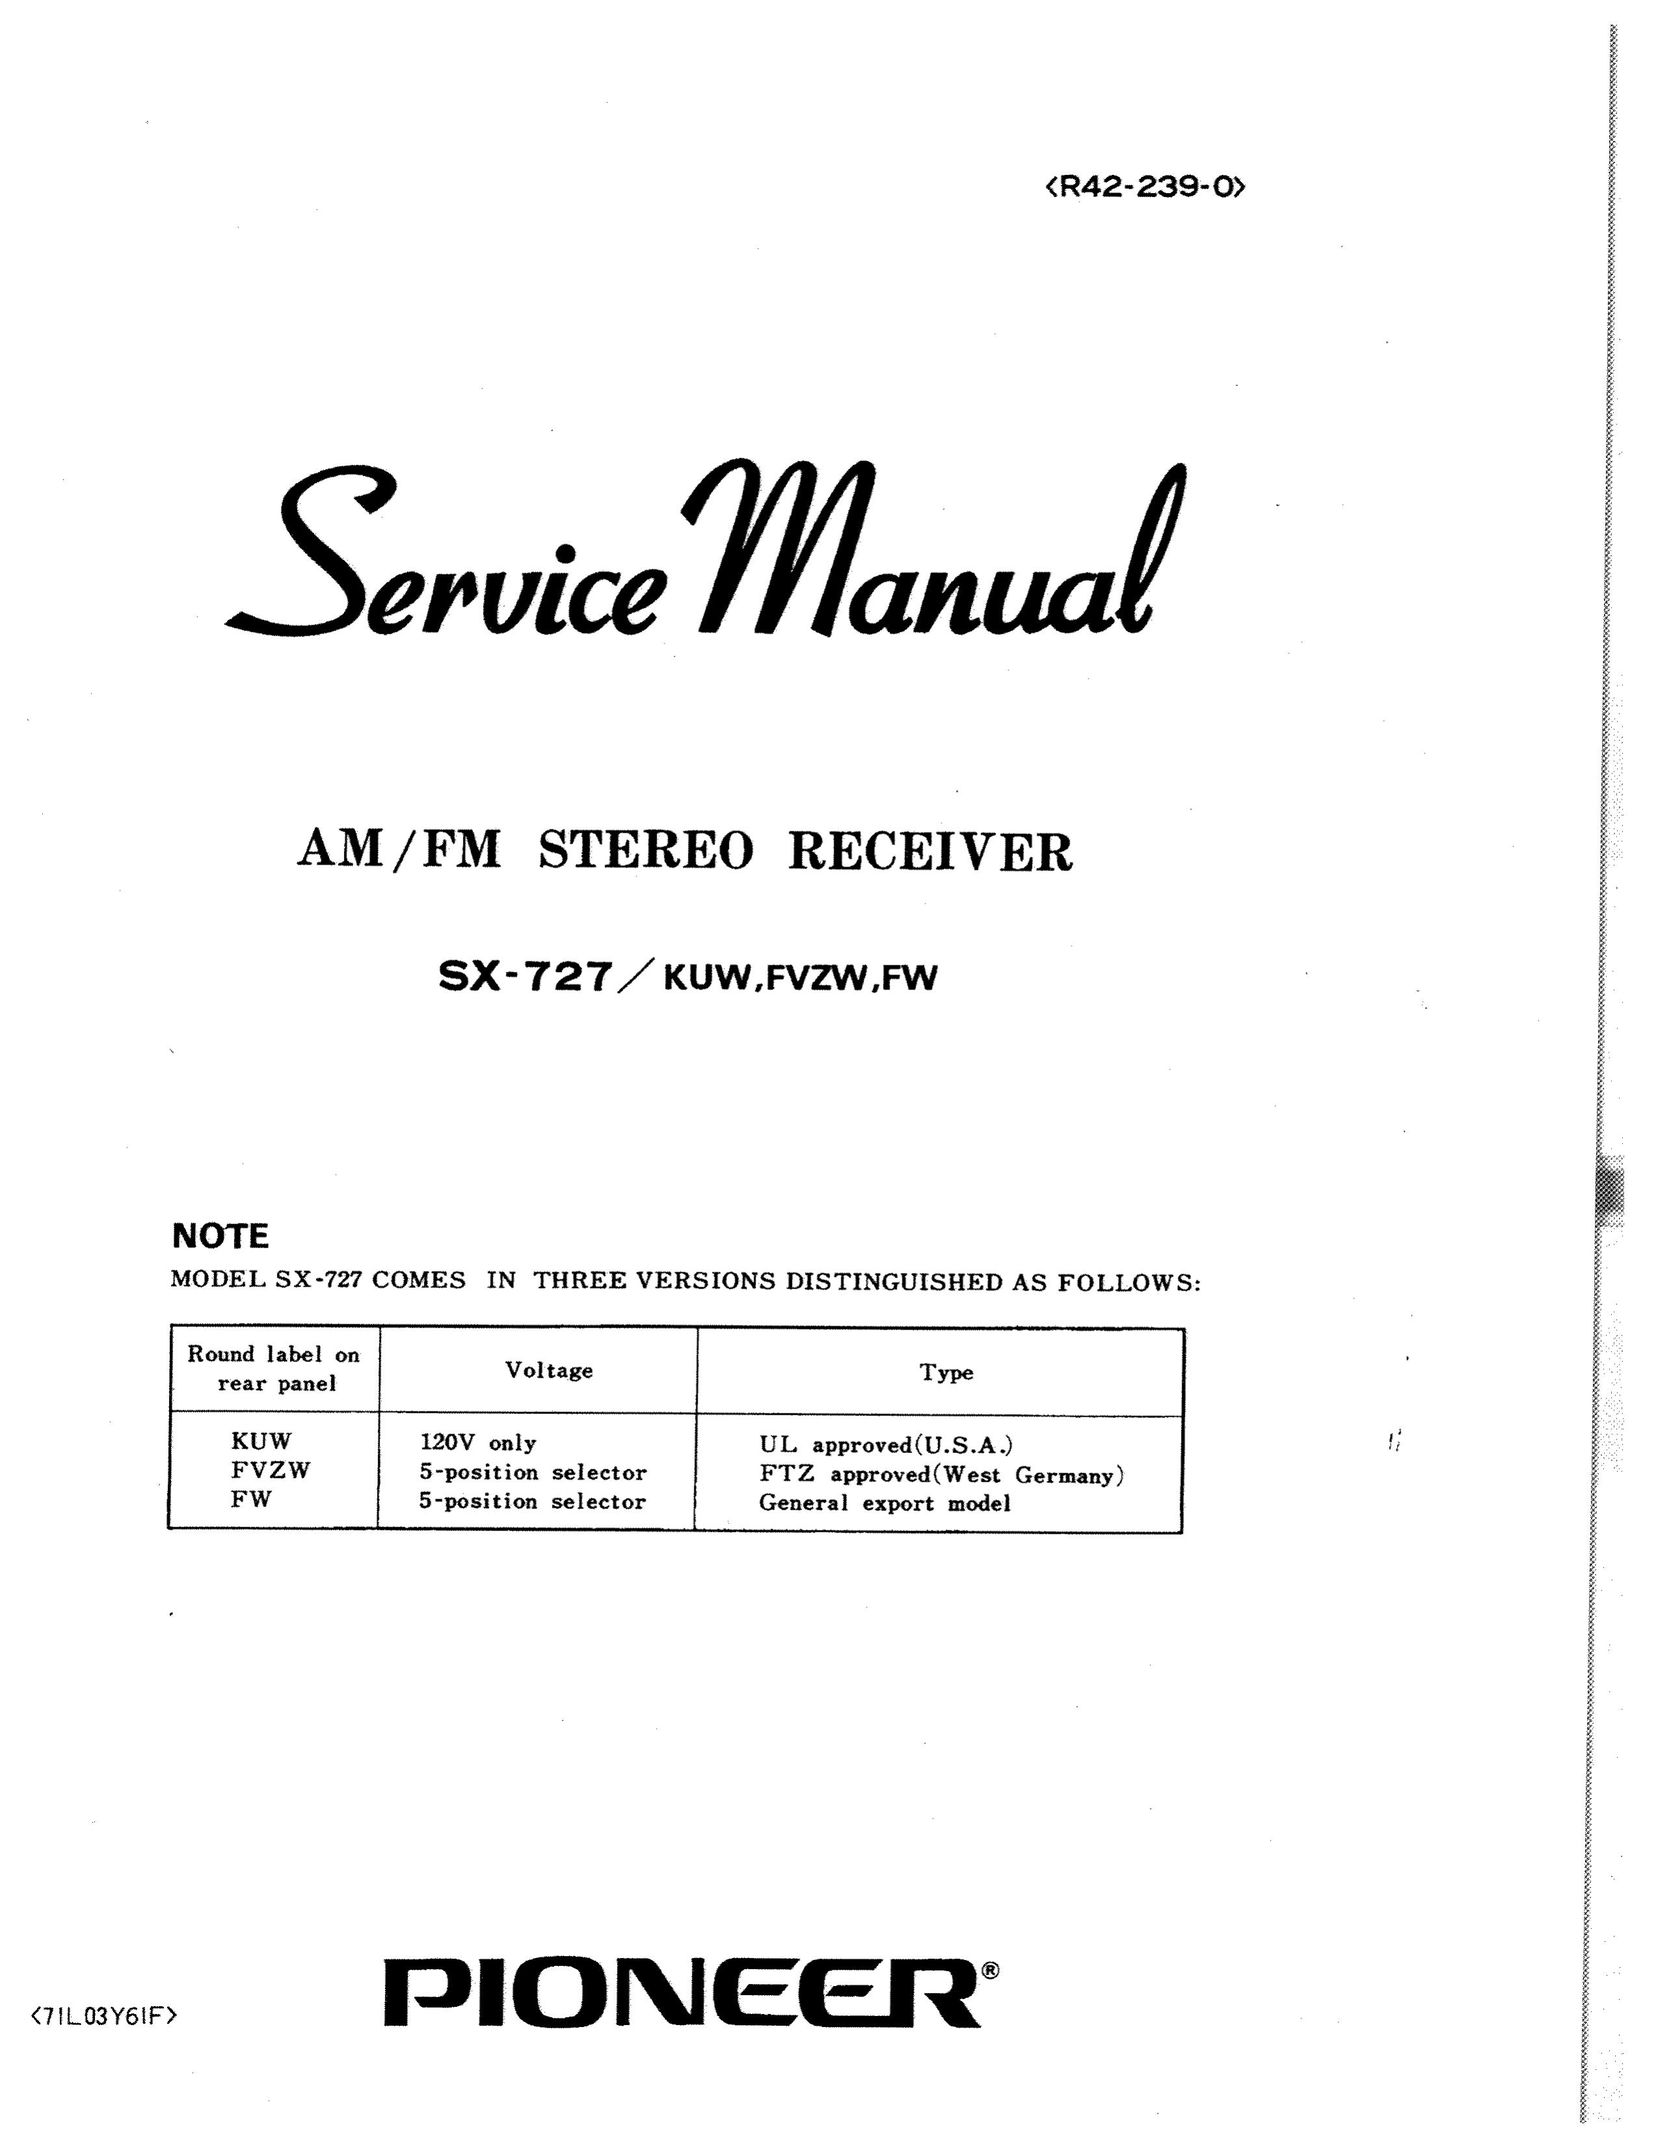 Pioneer FW Stereo Receiver User Manual